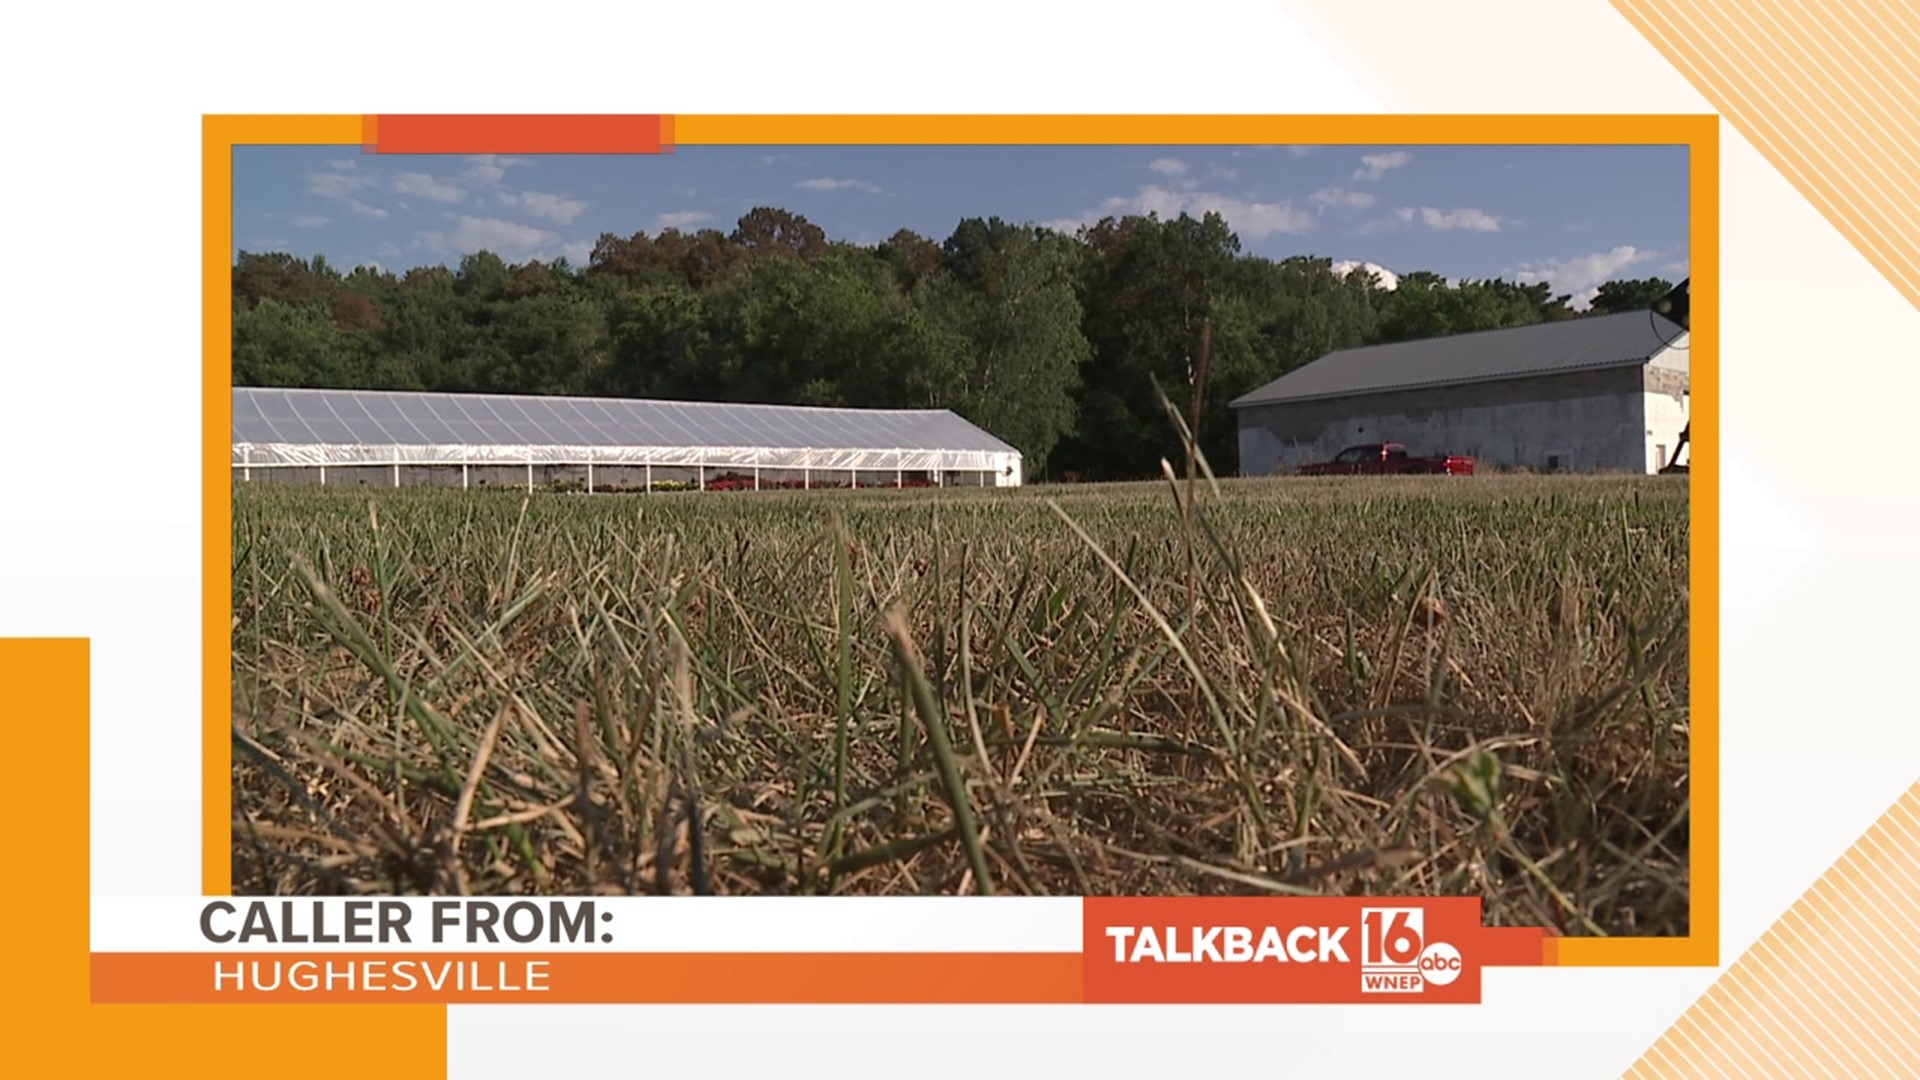 A caller from Hughesville is commenting on dry grass from the recent dry weather.